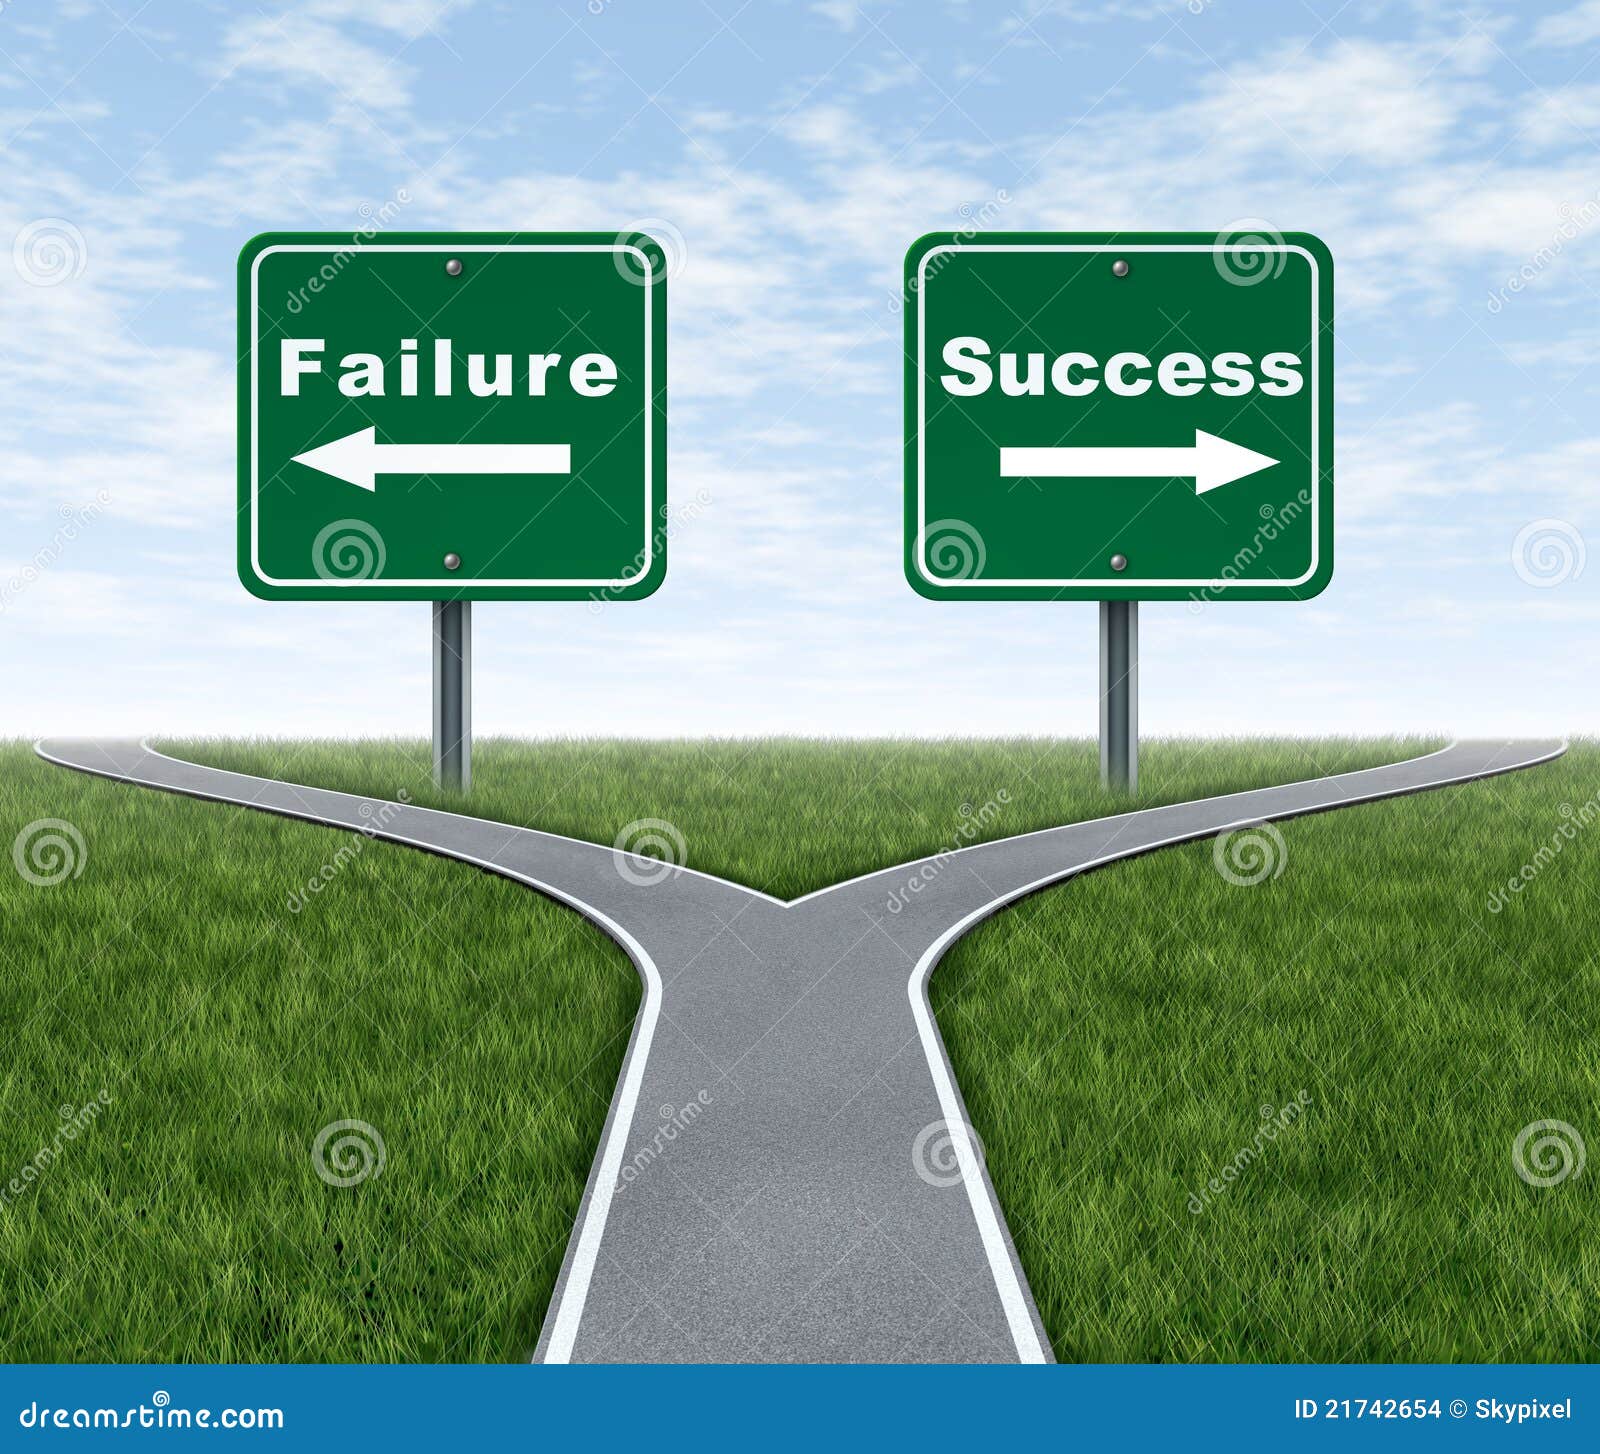 Success And Failure Images